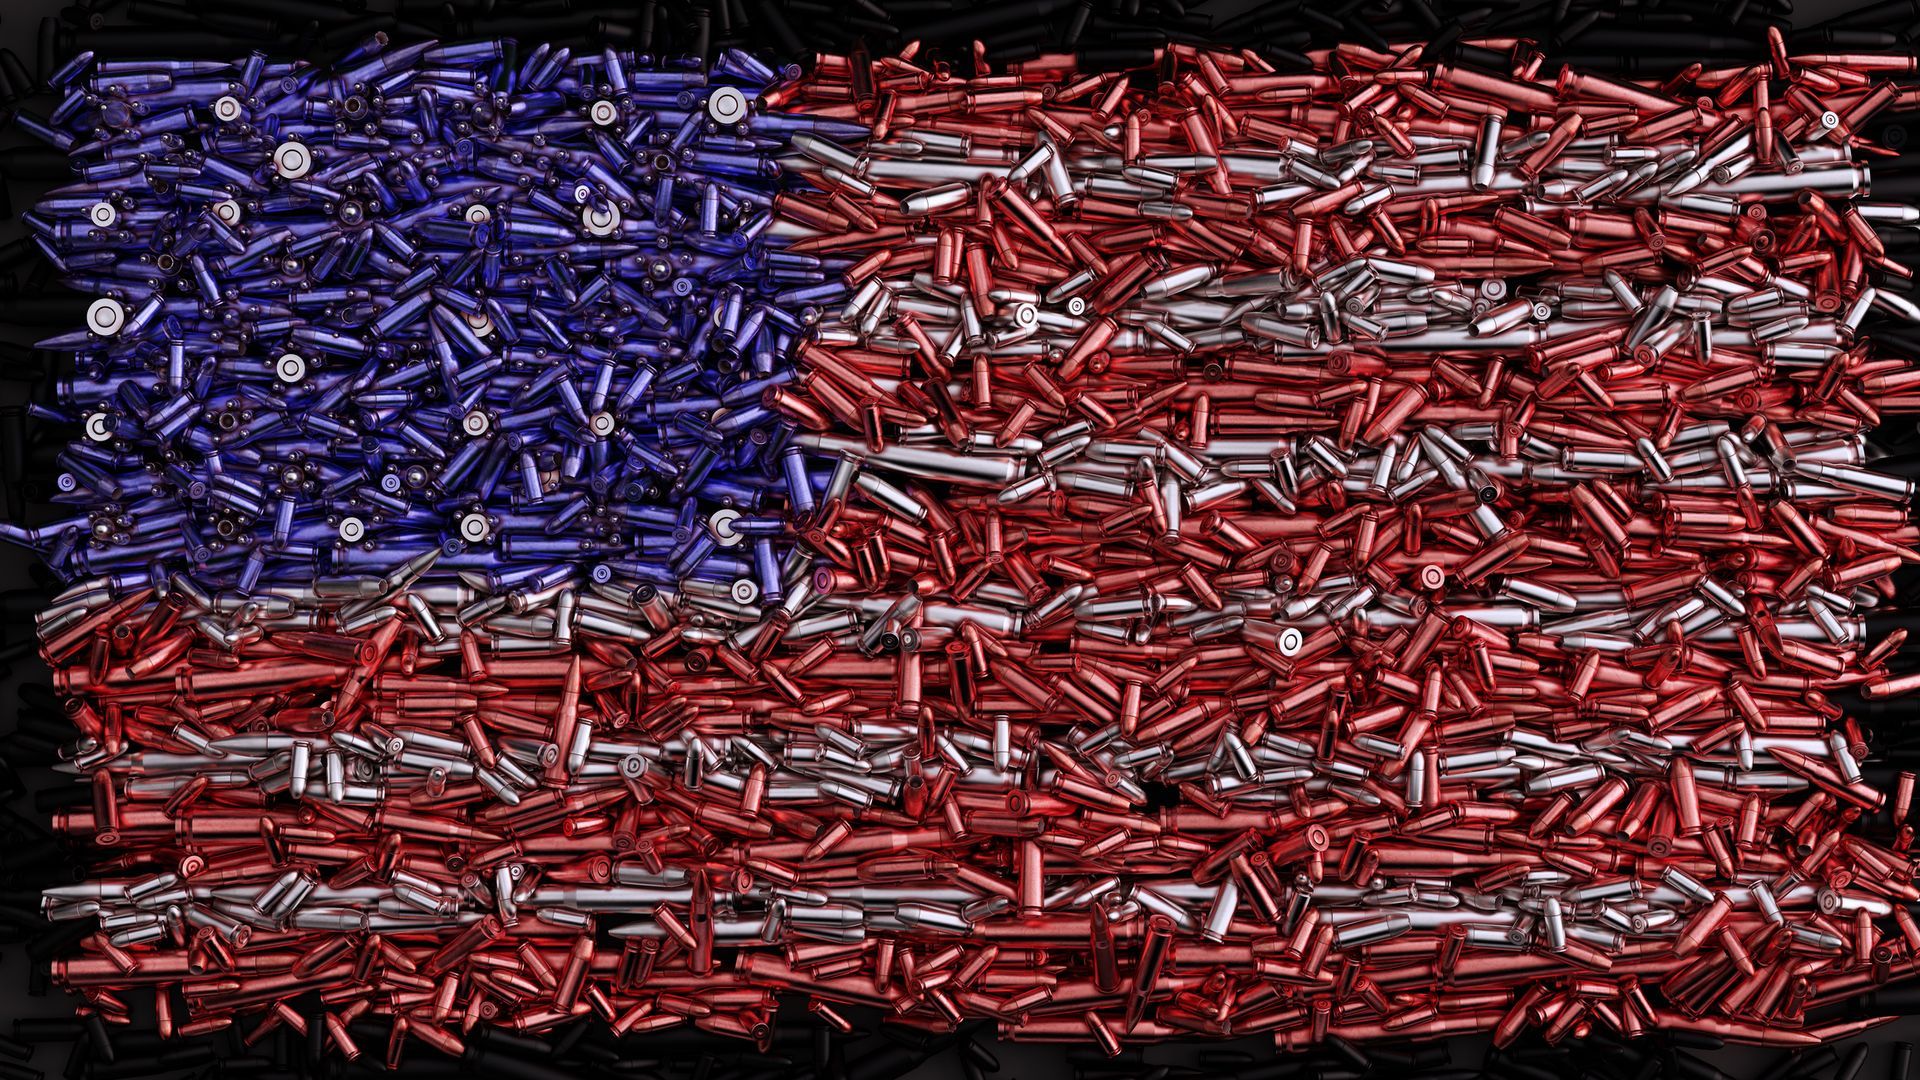 An american flag made out of bullets on a black background.